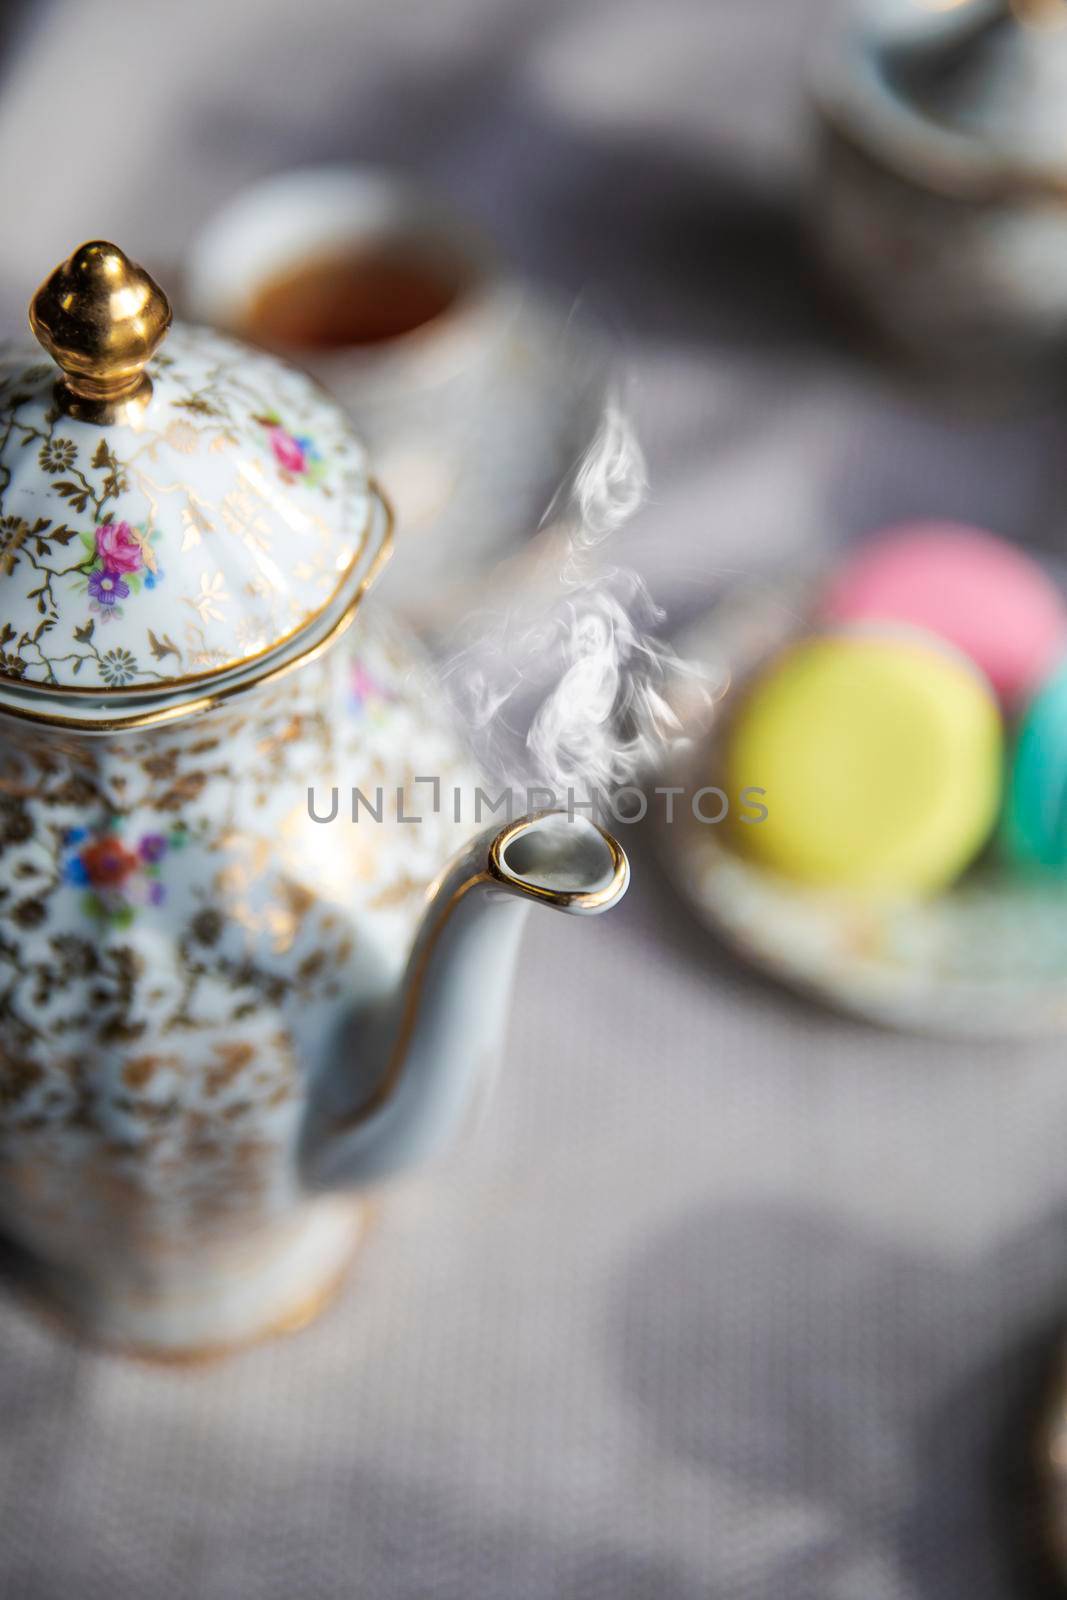 Traditional antique tea pot English culture afternoon tea with hot tea and smoke on diner table, vintage high tea concept elegant stylish set beauty